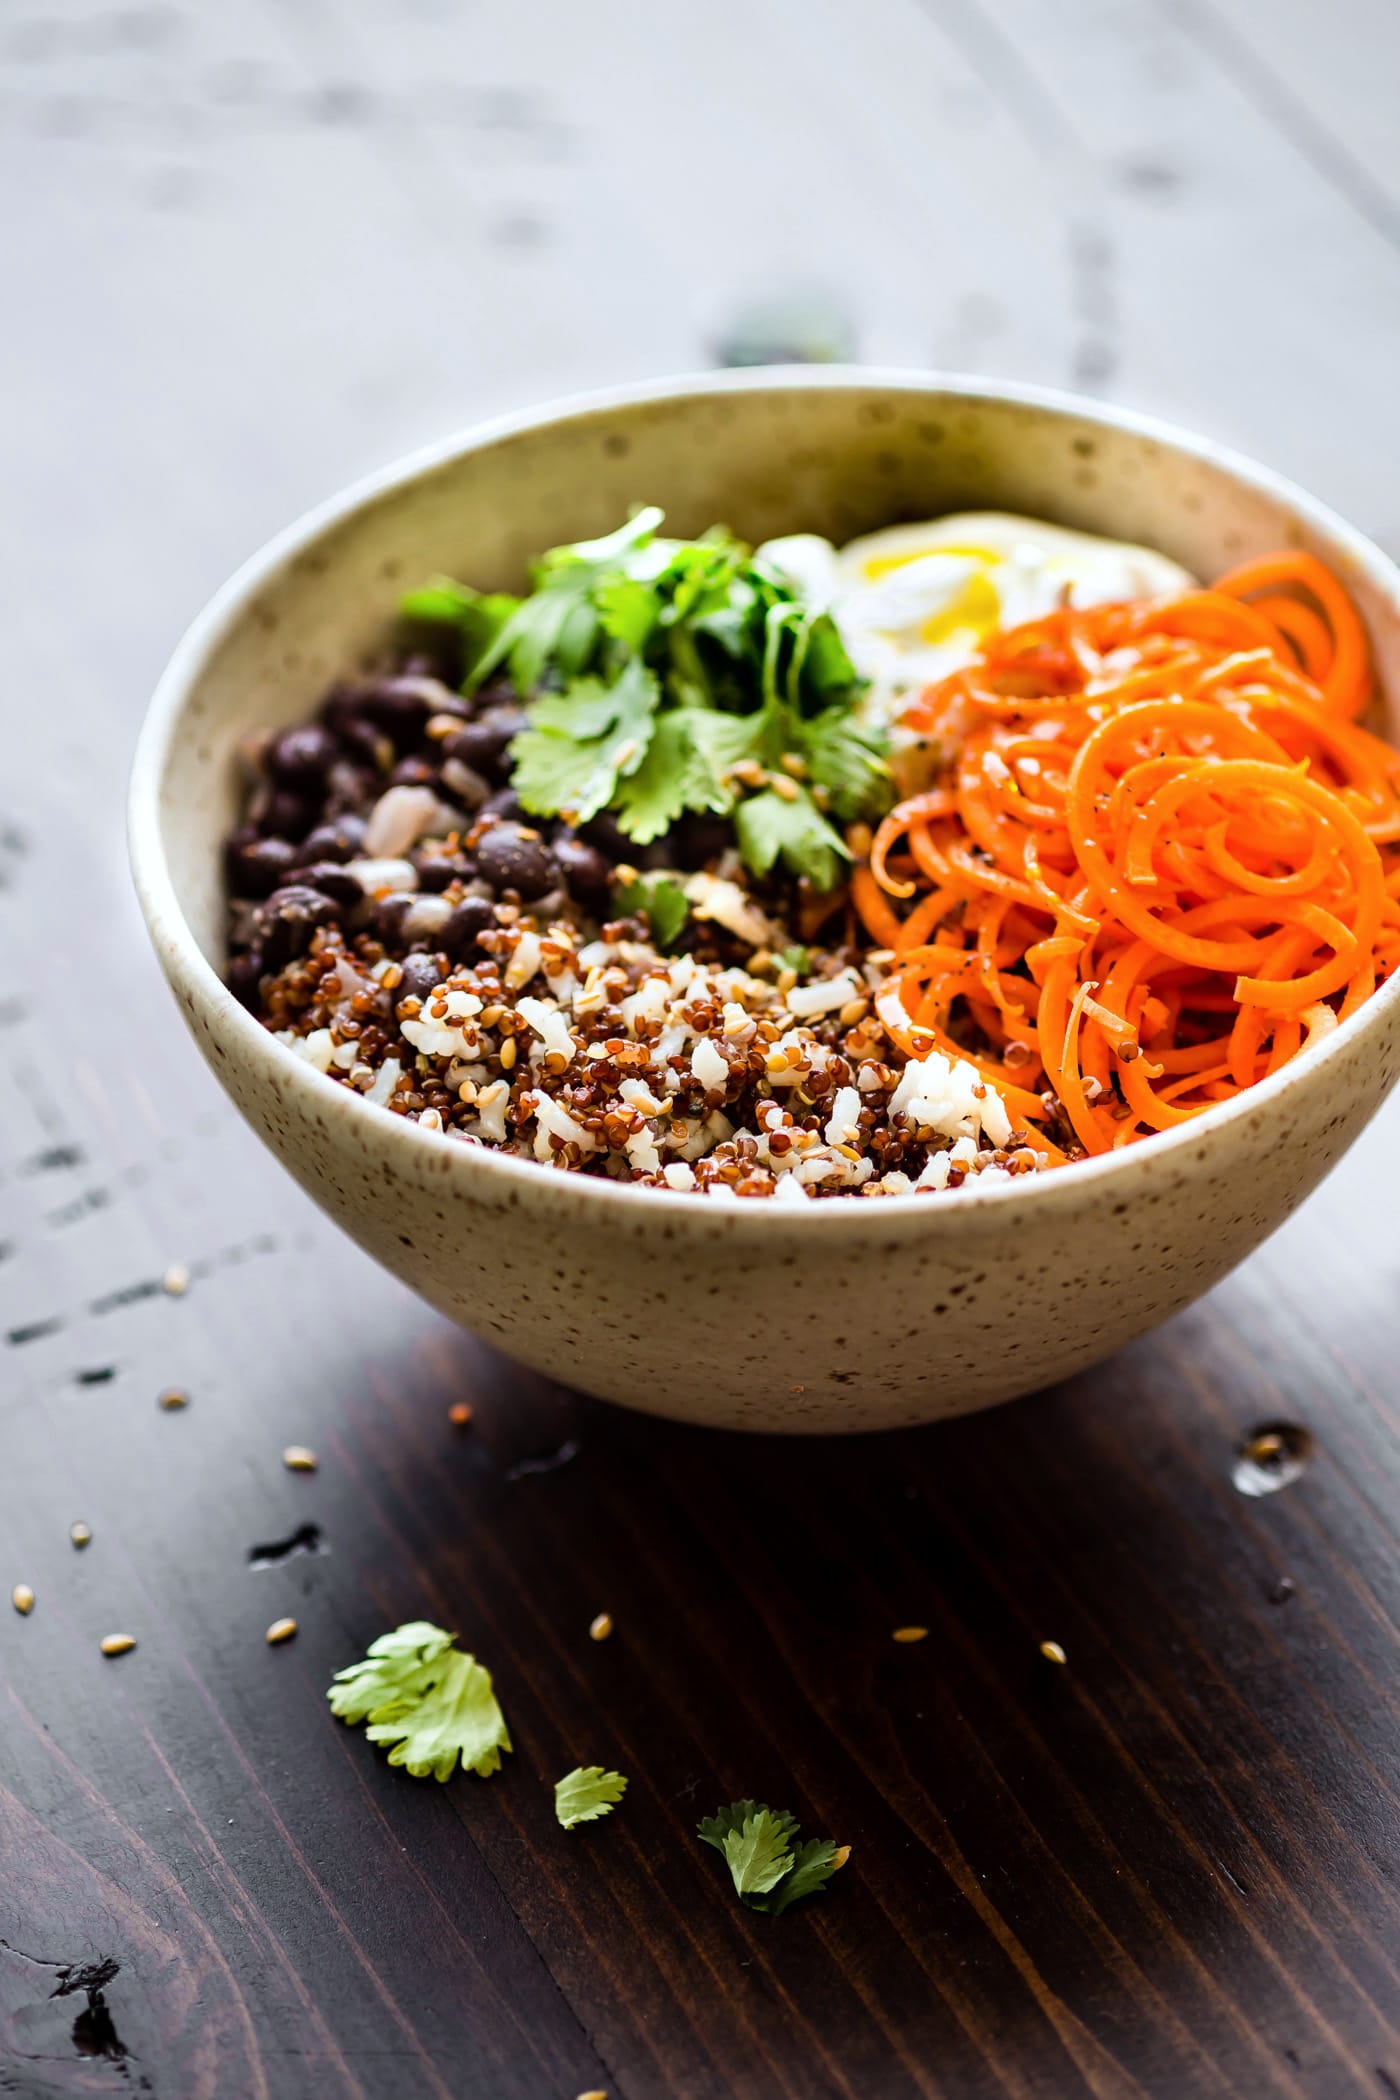 Gluten free Balance Bowls! No matter what you call these plant powered "balance bowls"— Power bowls, buddha bowls, Macro Bowls, Quinoa Bowls, etc. They truly are easy to make! A healthy meal prep bowl packed full of balanced macronutrients, vitamins, minerals, and more!